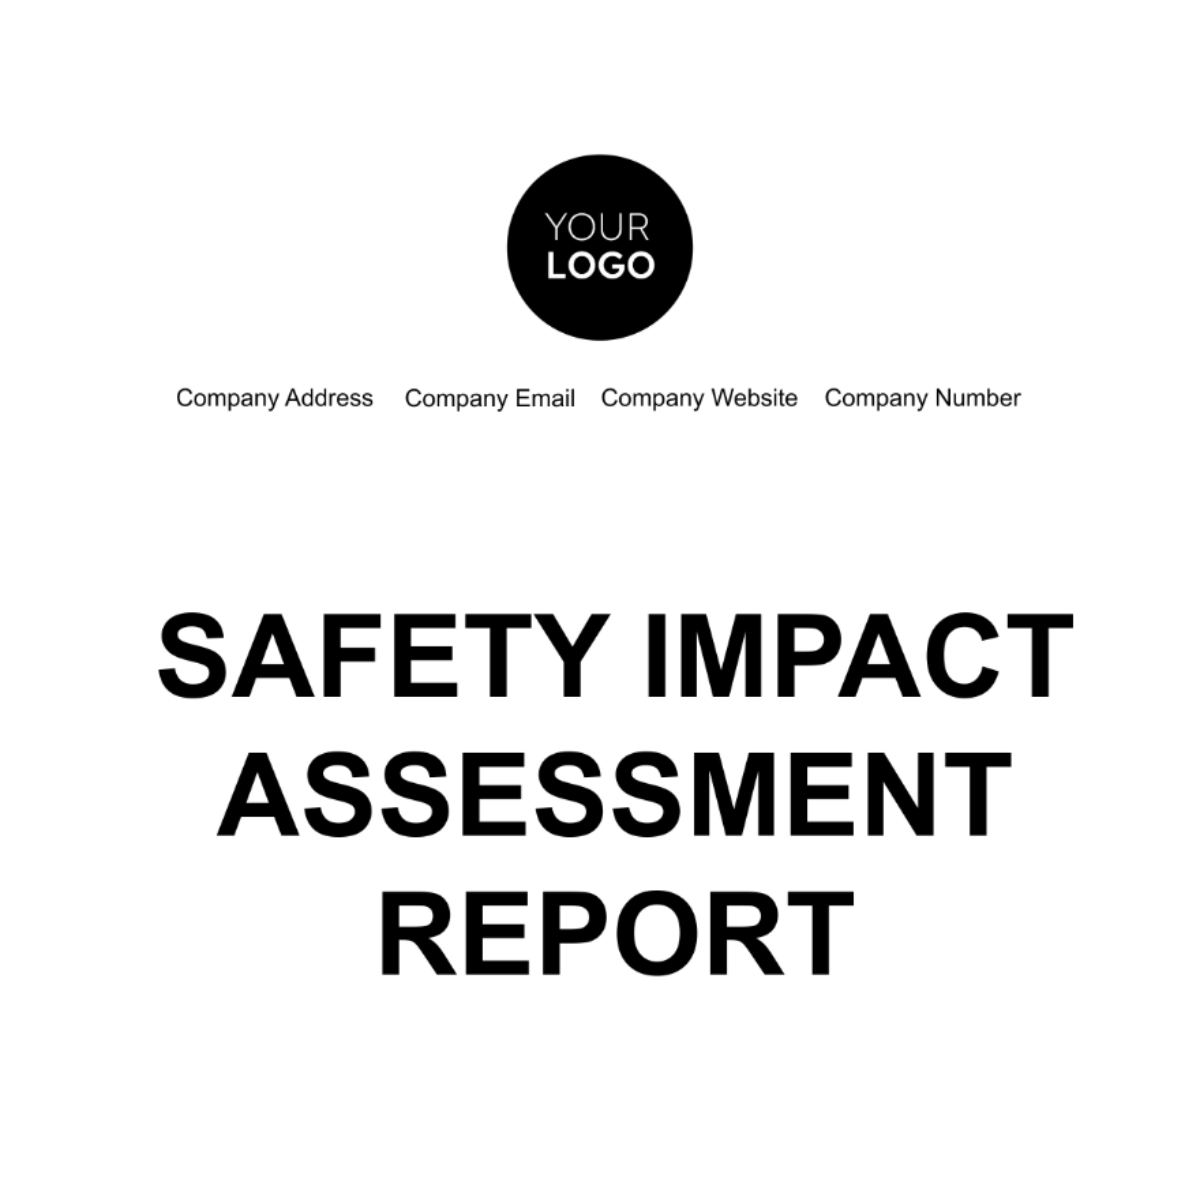 Safety Impact Assessment Report Template